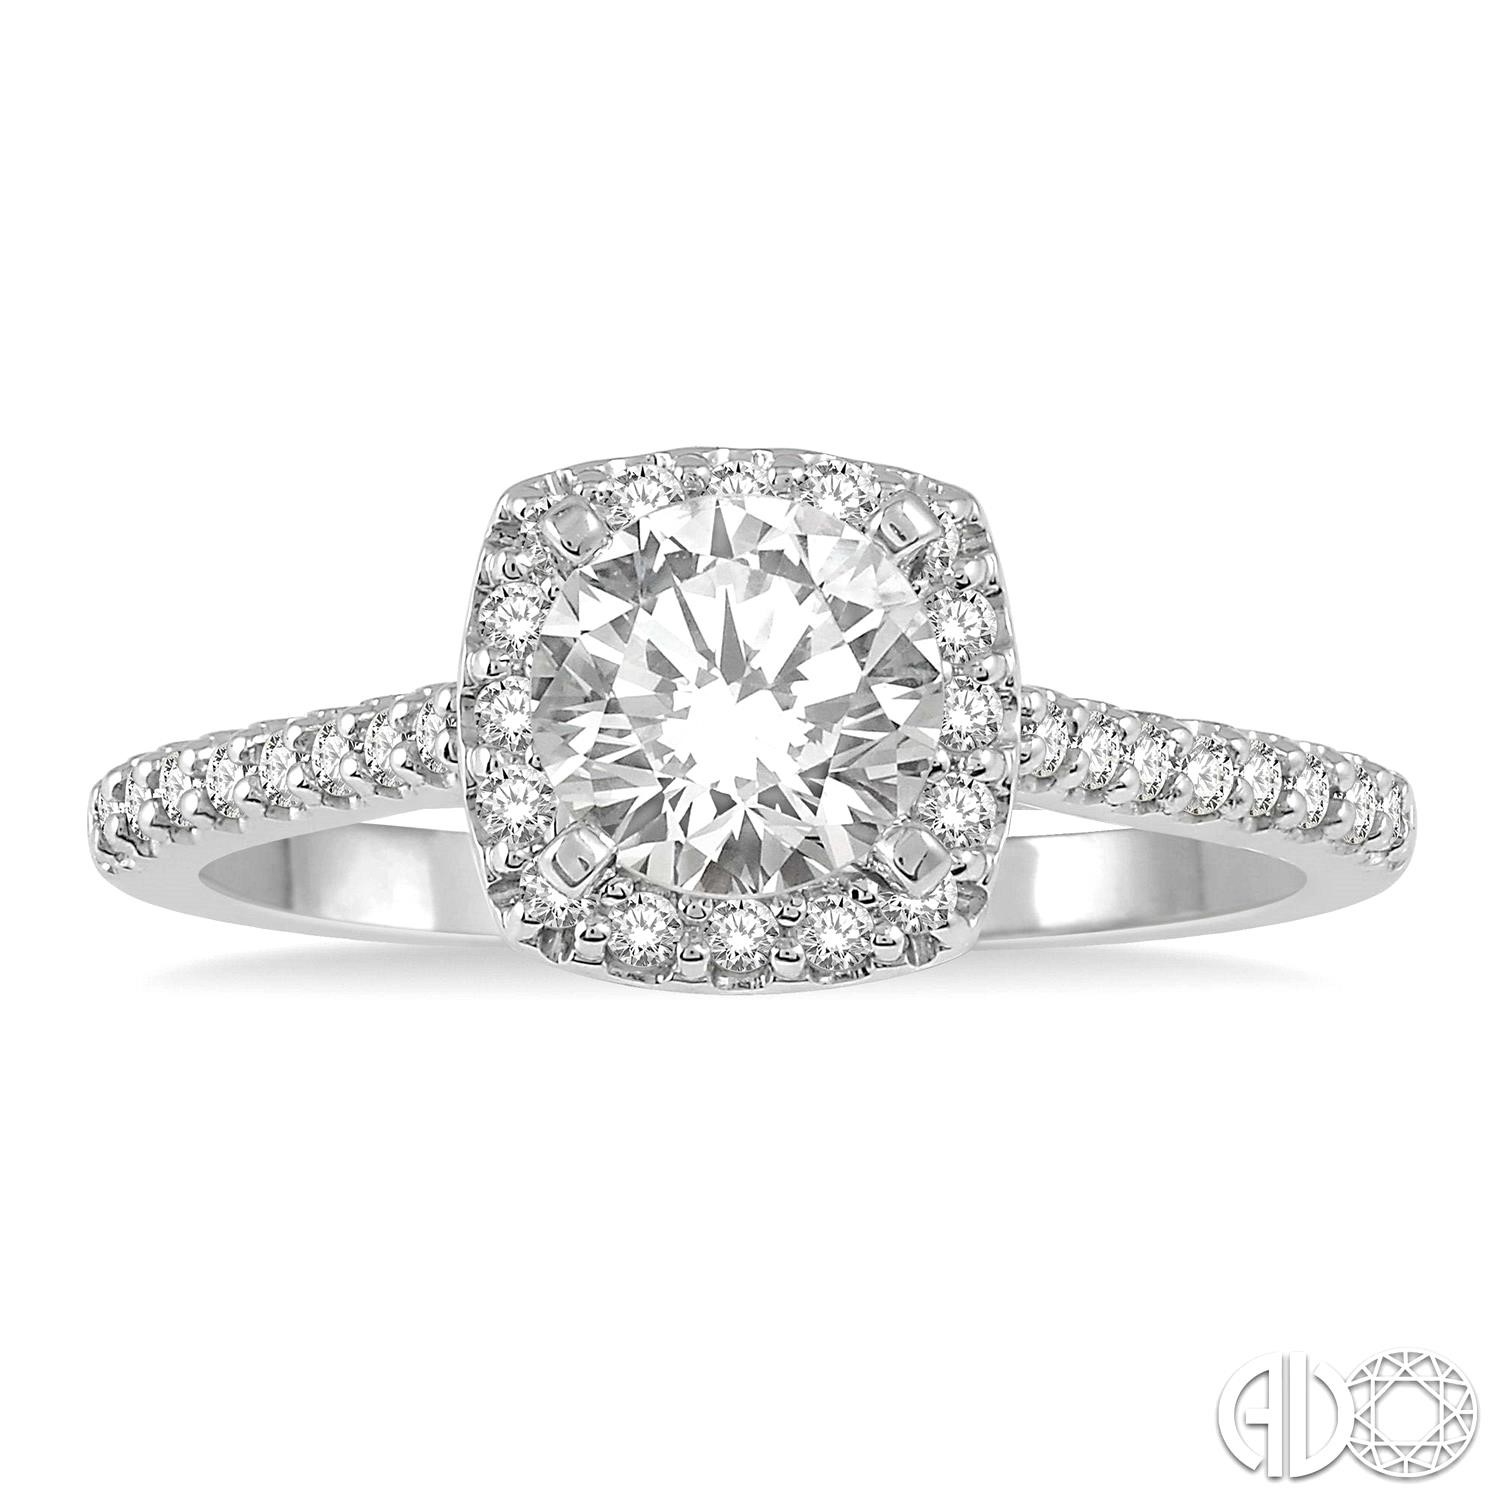 14K WHITE GOLD HALO ENGAGEMENT RING SIZE 6.5 WITH ONE 0.25CT ROUND DIAMOND AND 30=0.15TW ROUND H-I SI3-I1 DIAMONDS